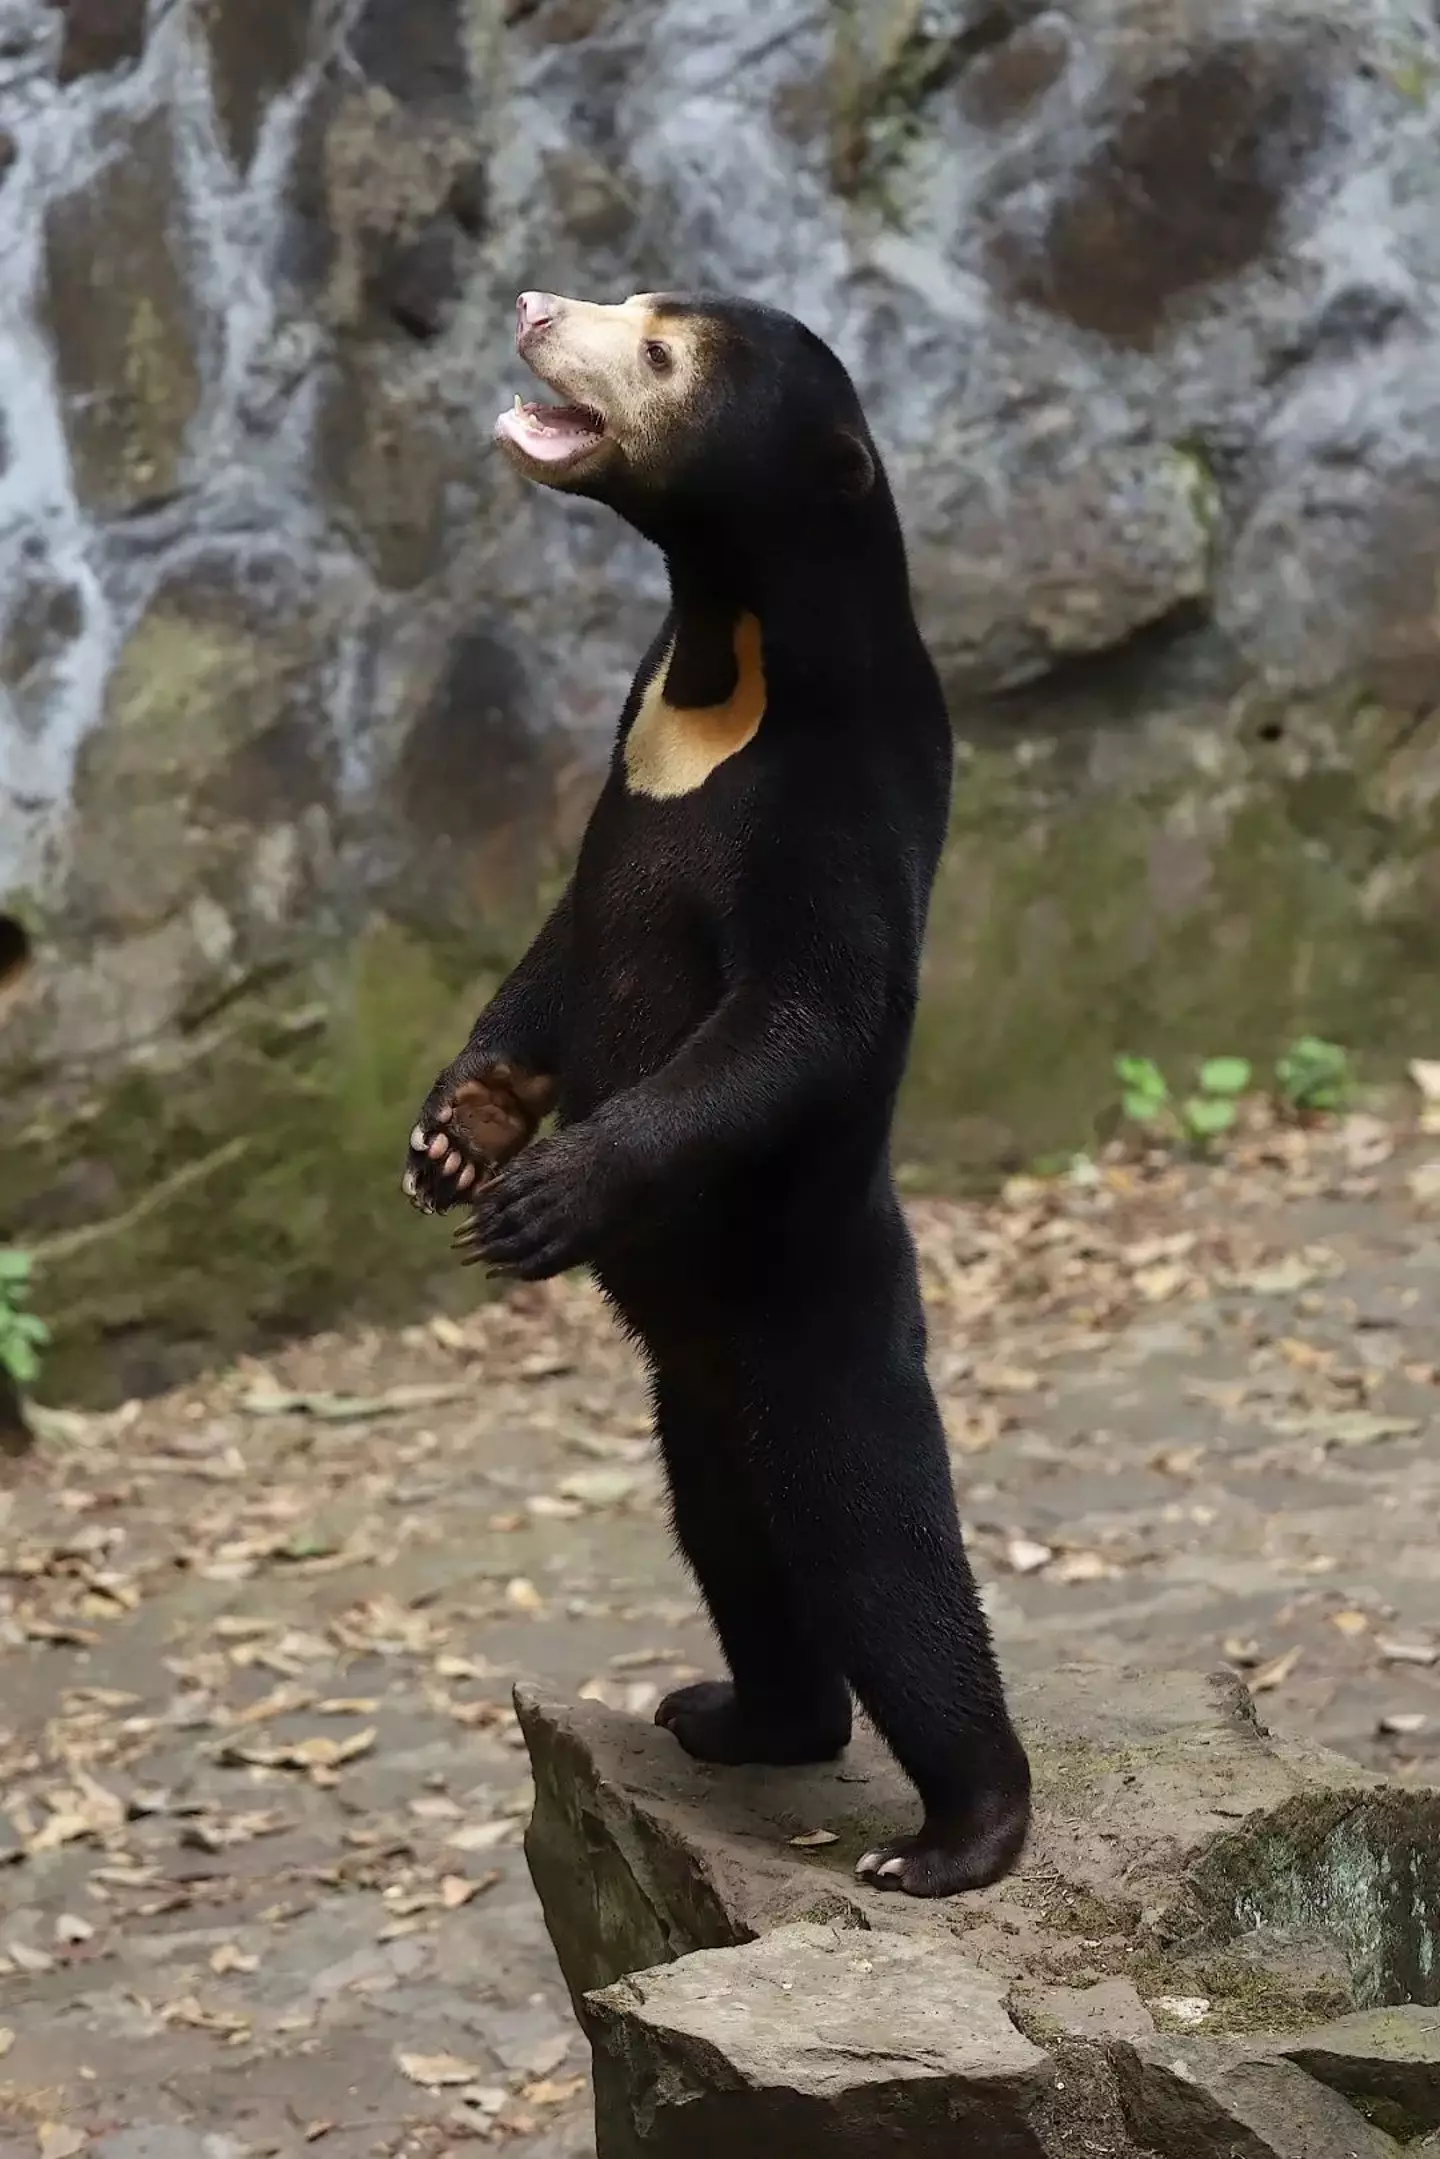 Sun bears are the 'smallest bear in the world'.